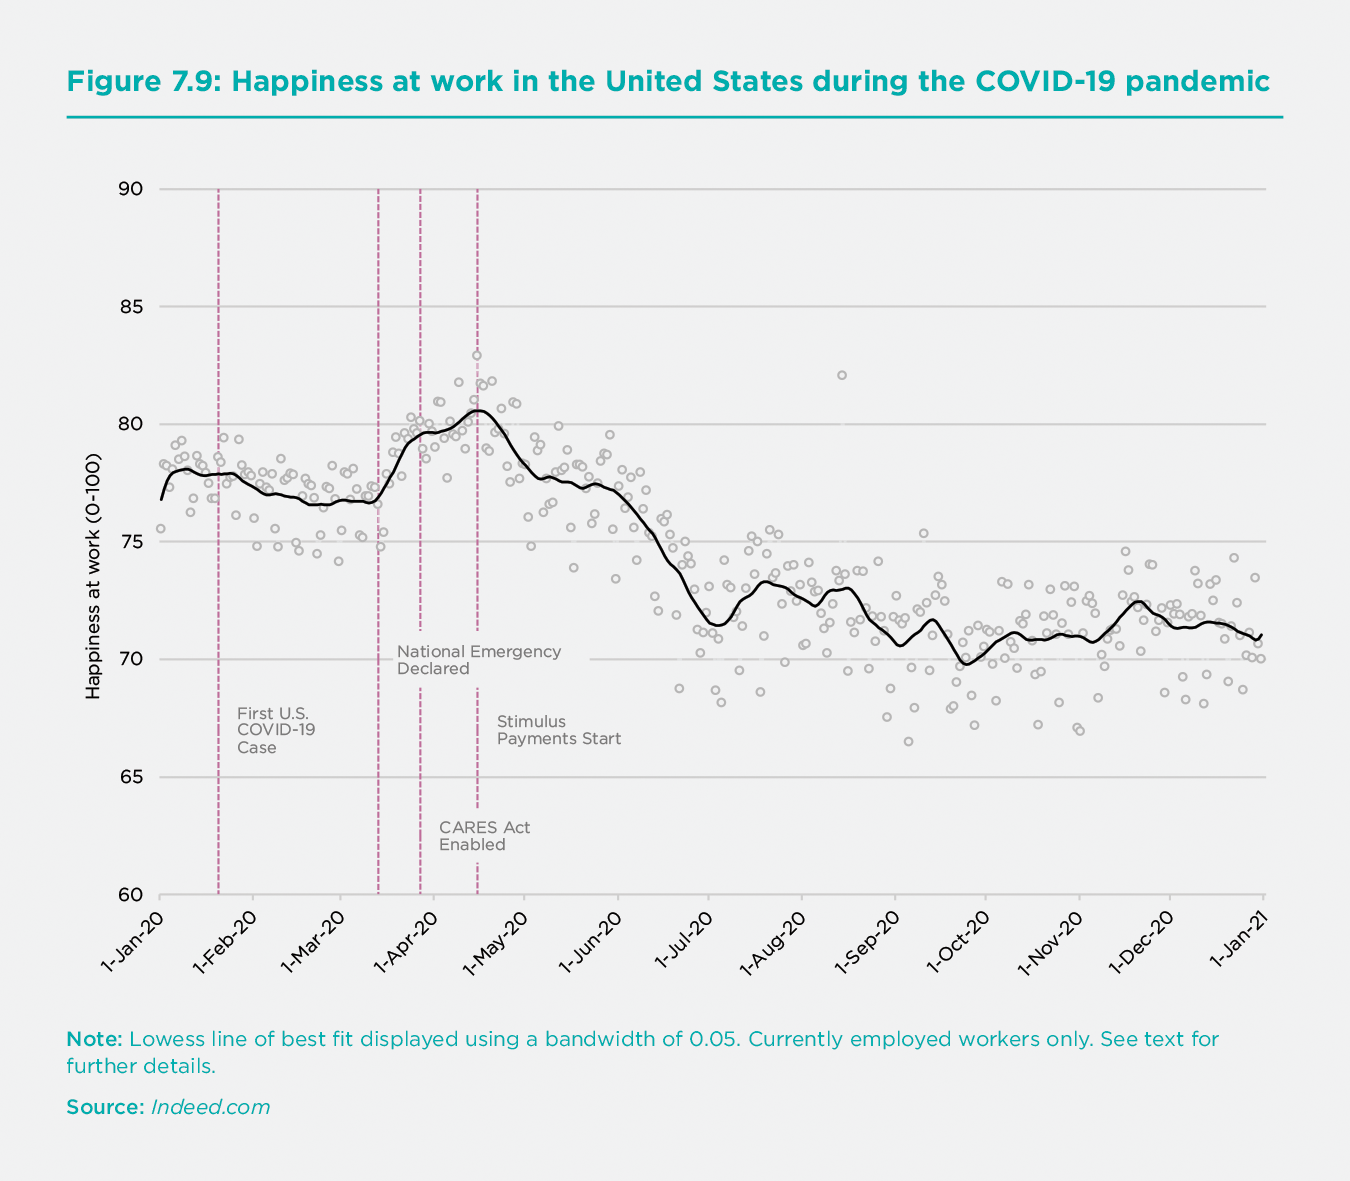 Figure 7.9: Happiness at work in the United States during the COVID-19 pandemic